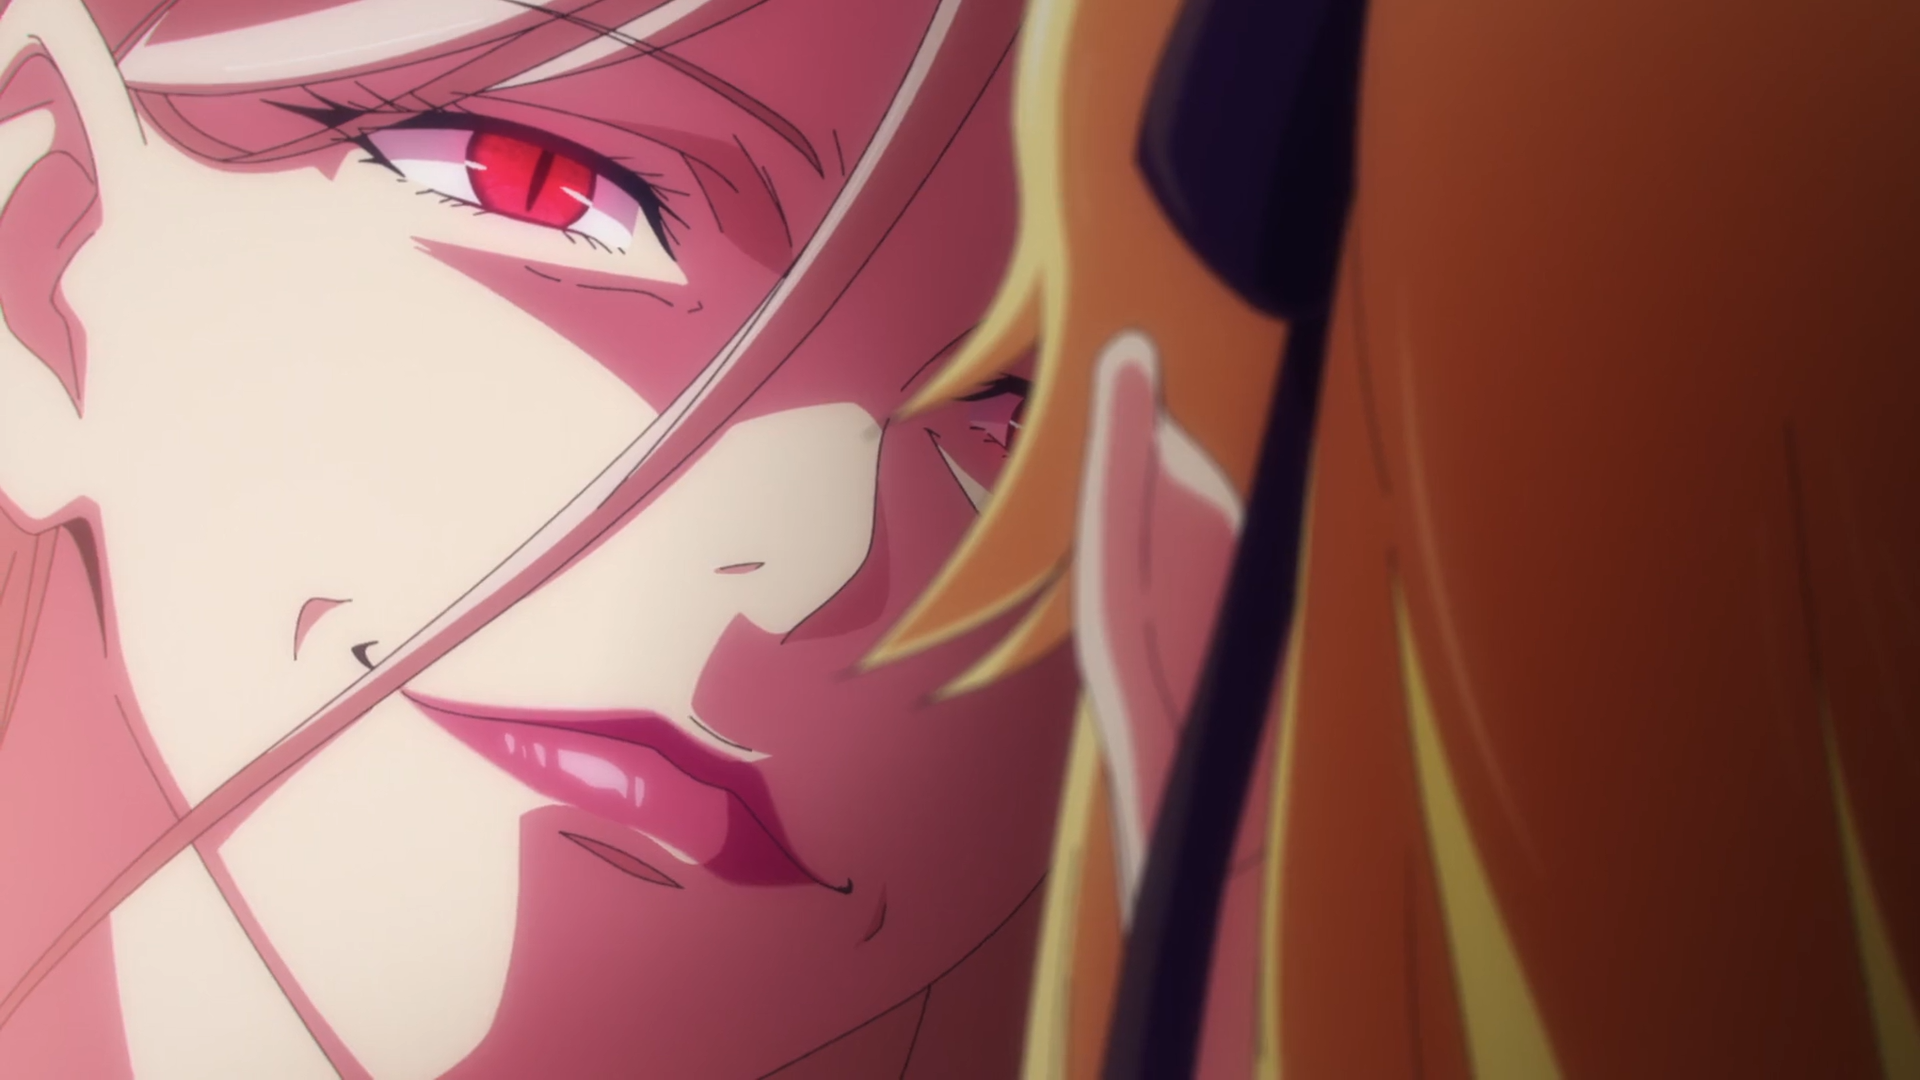 The Over-the-Top Faces of KAKEGURUI TWIN